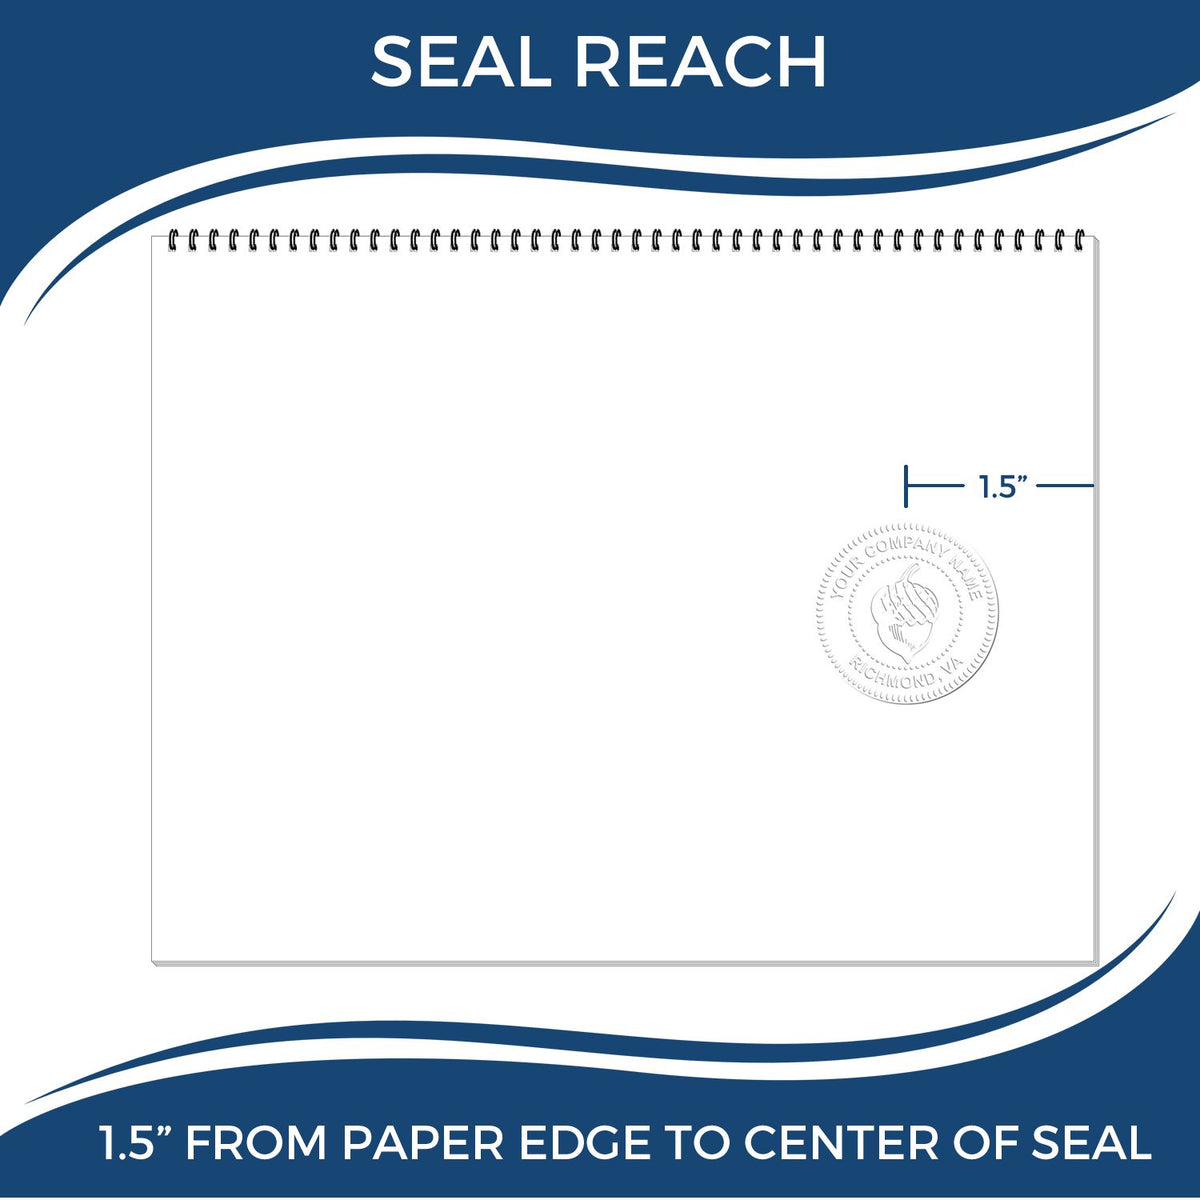 An infographic showing the seal reach which is represented by a ruler and a miniature seal image of the Gift Connecticut Engineer Seal